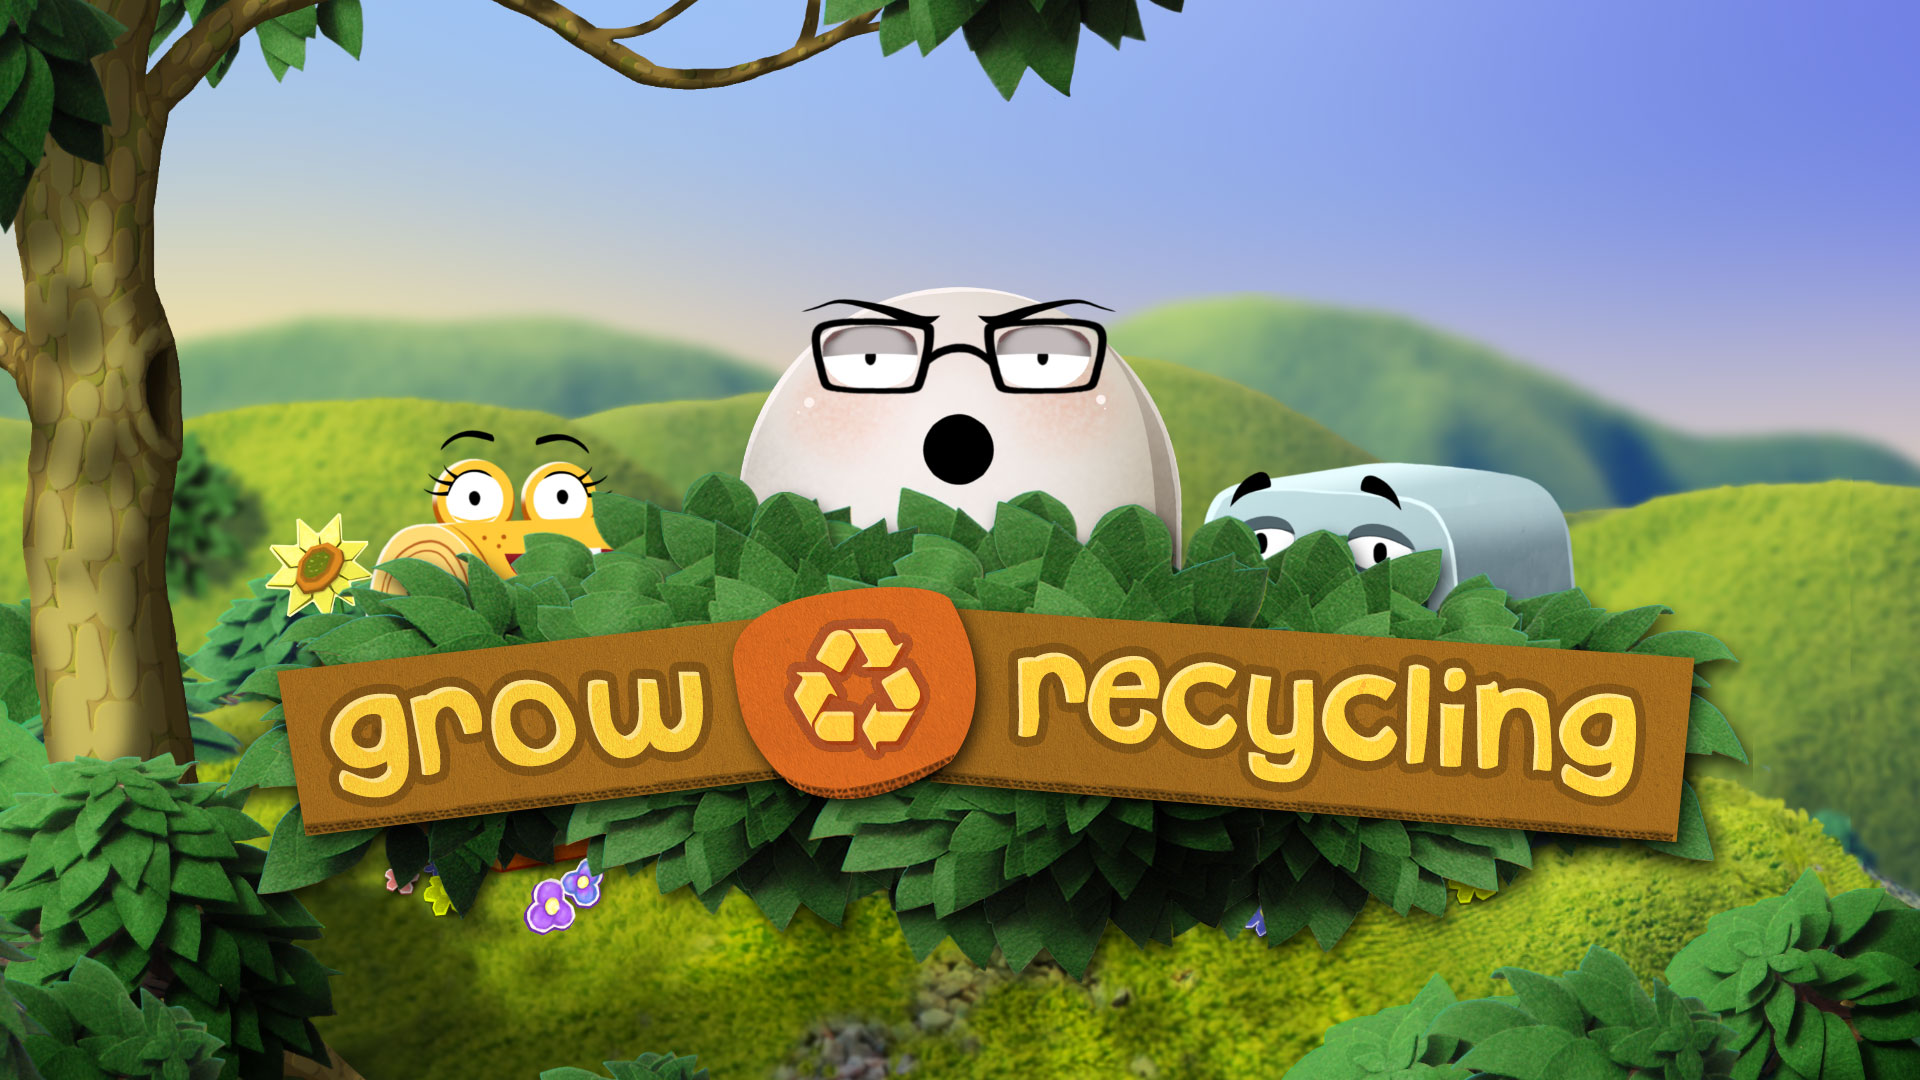 The three main characters from Grow Recycling huddle behind a bush printed with the app's name.